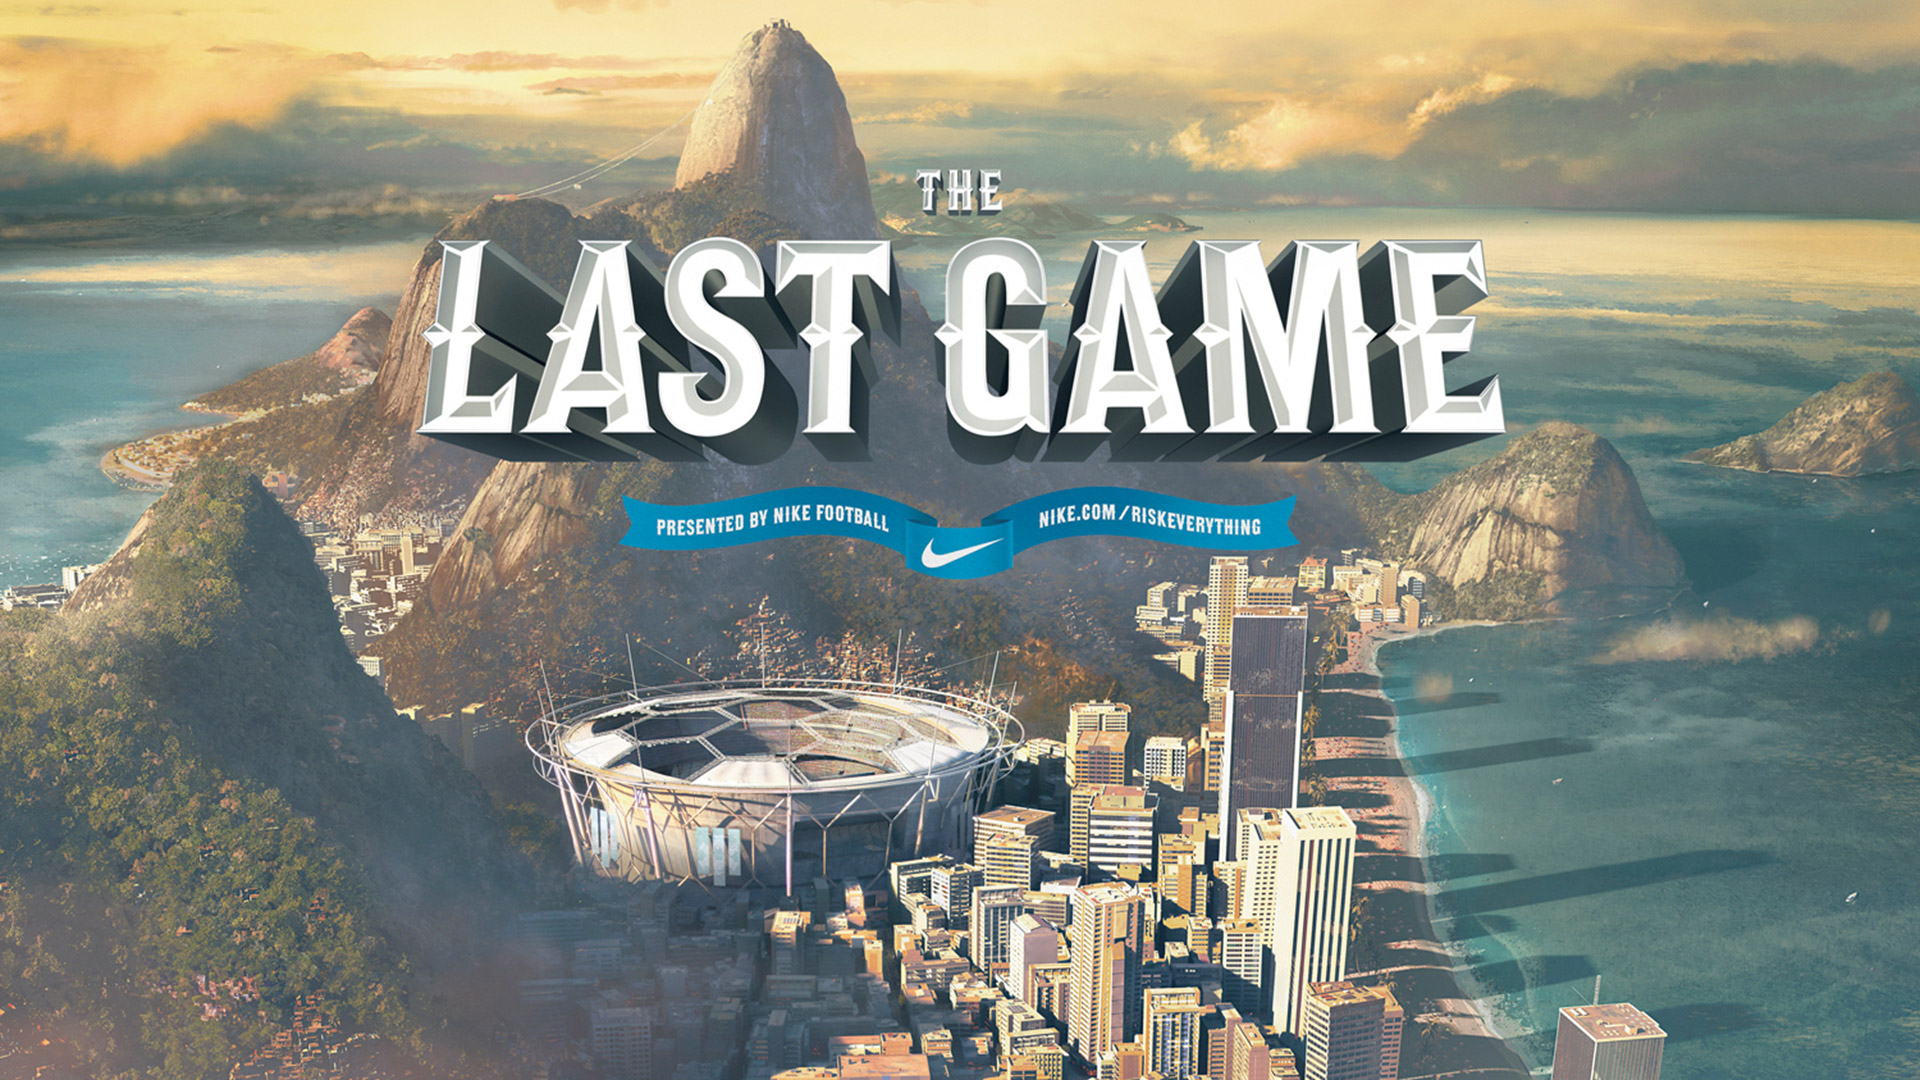 The last game s. Логотип the last game. Ласт гейм. Nike risk everything. The last game.